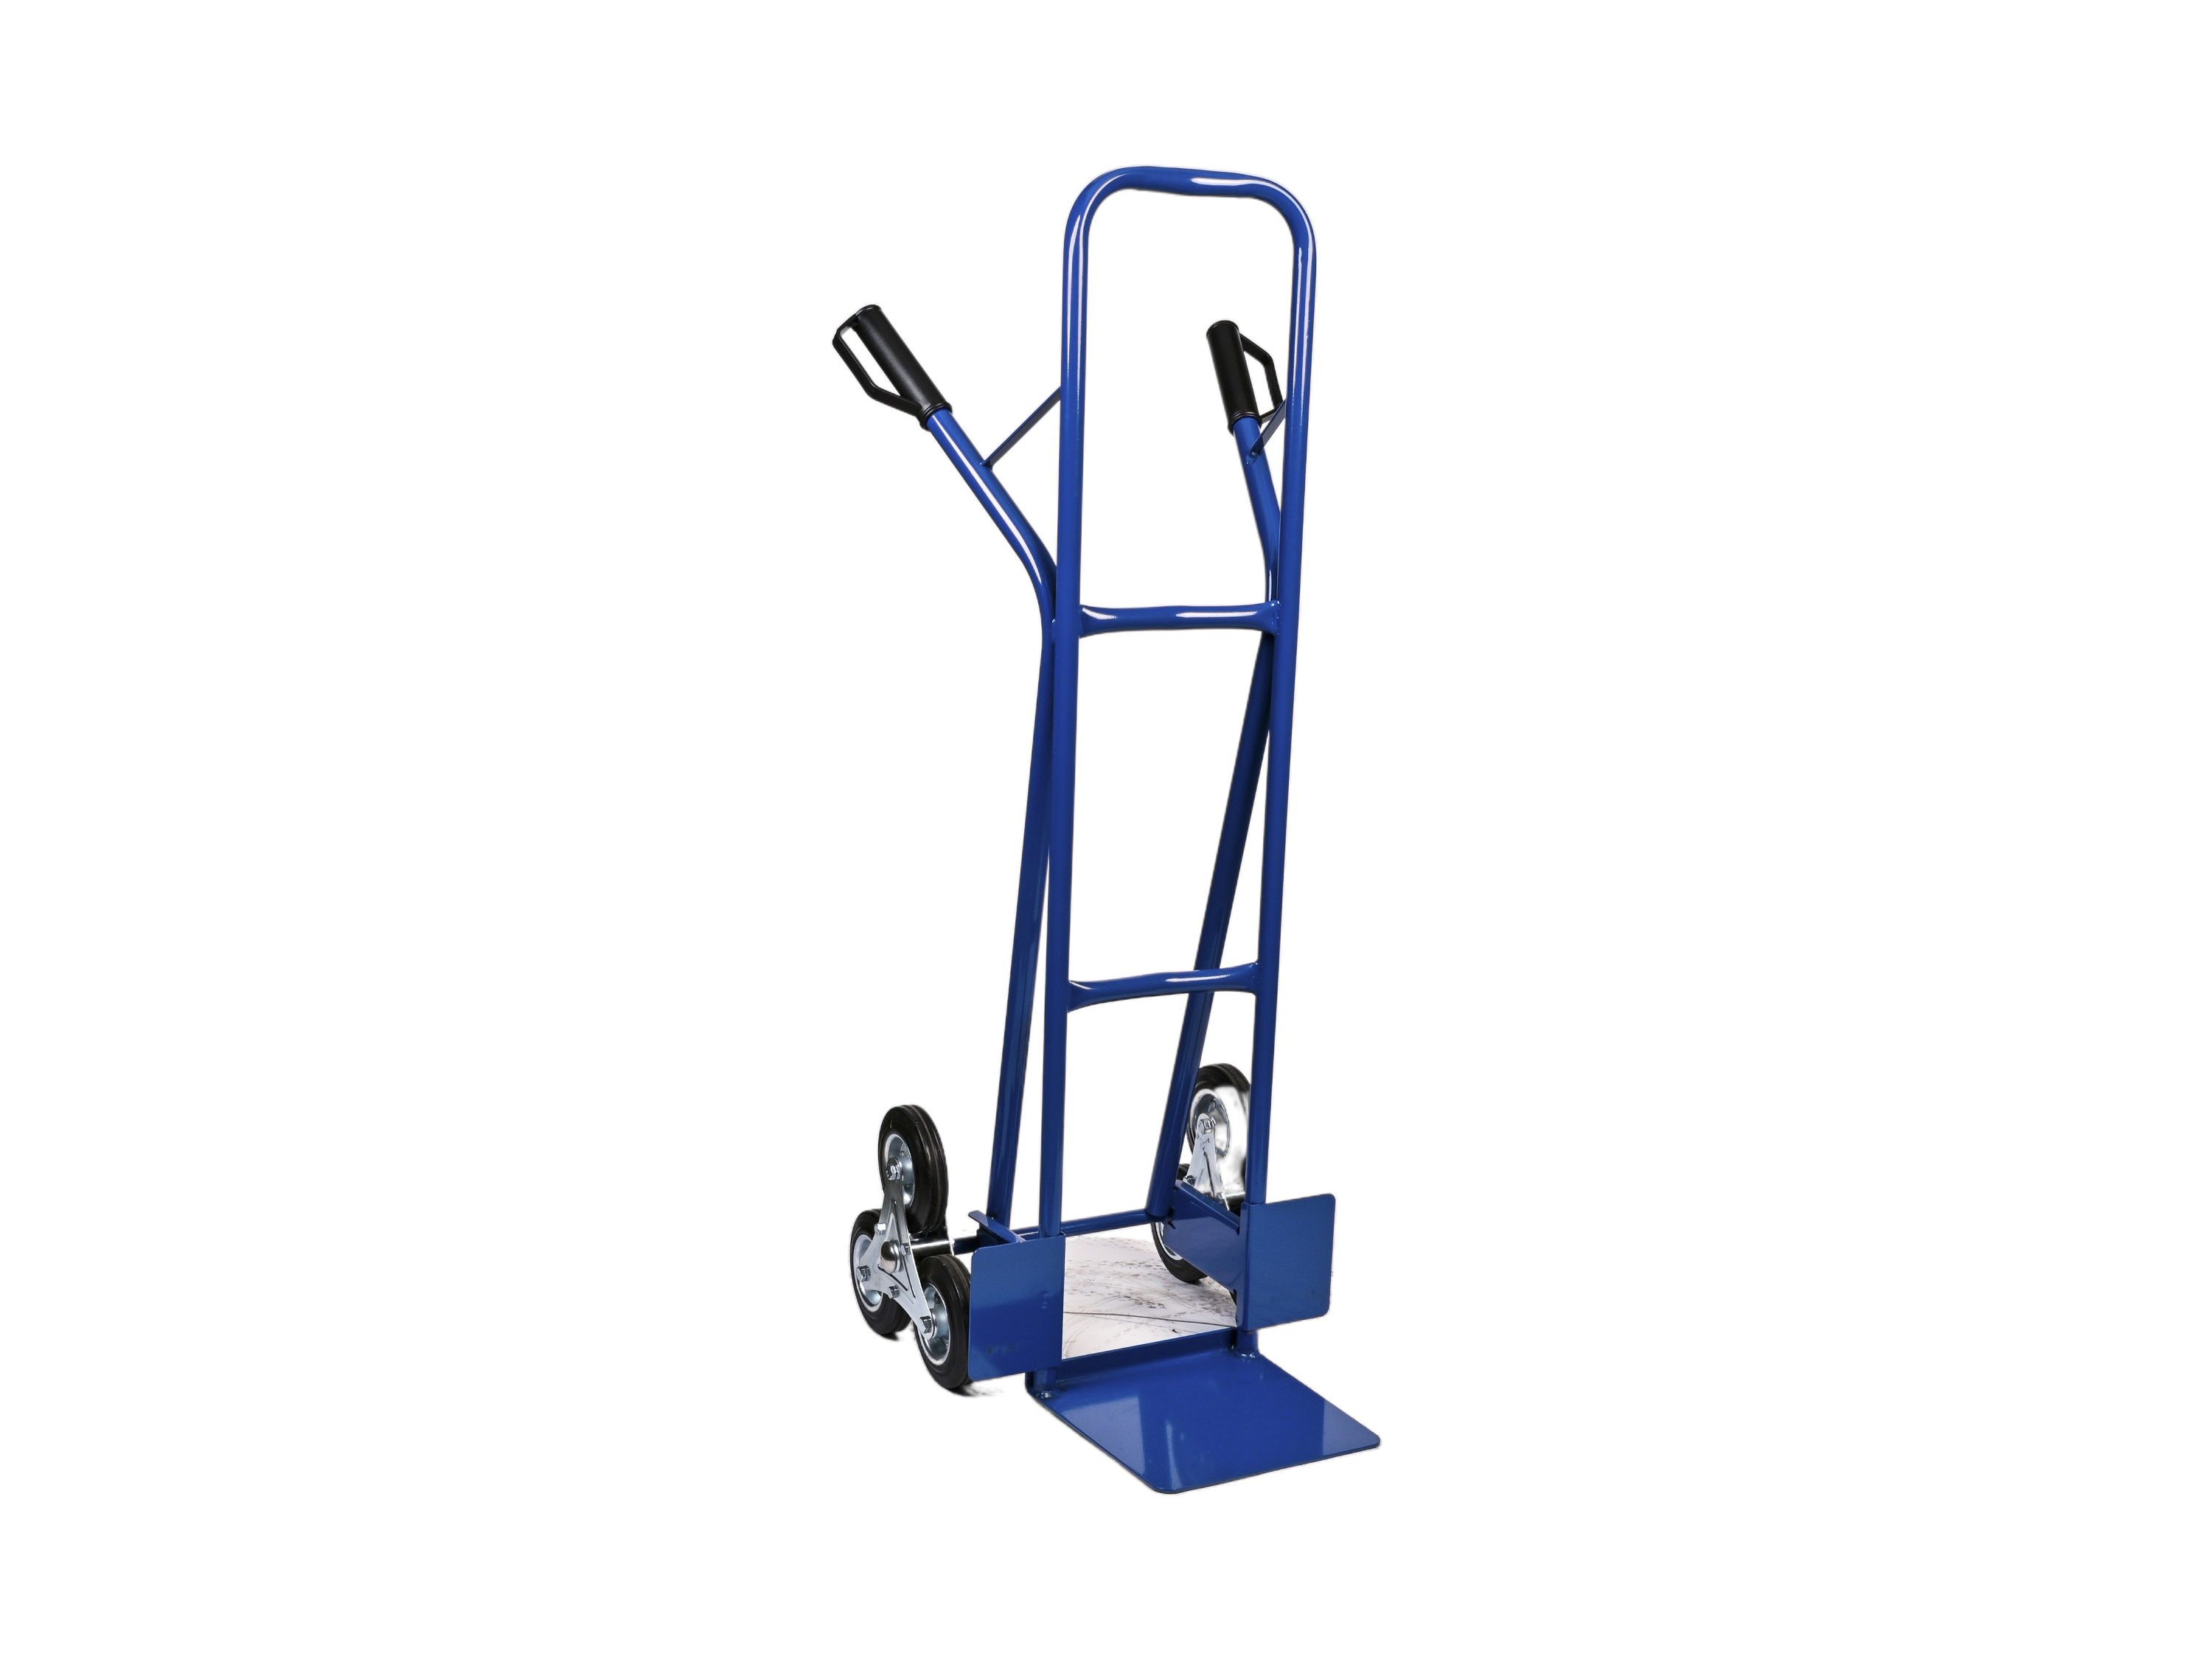 Handtrolley, Height 1300mm - Plate (300x300mm)